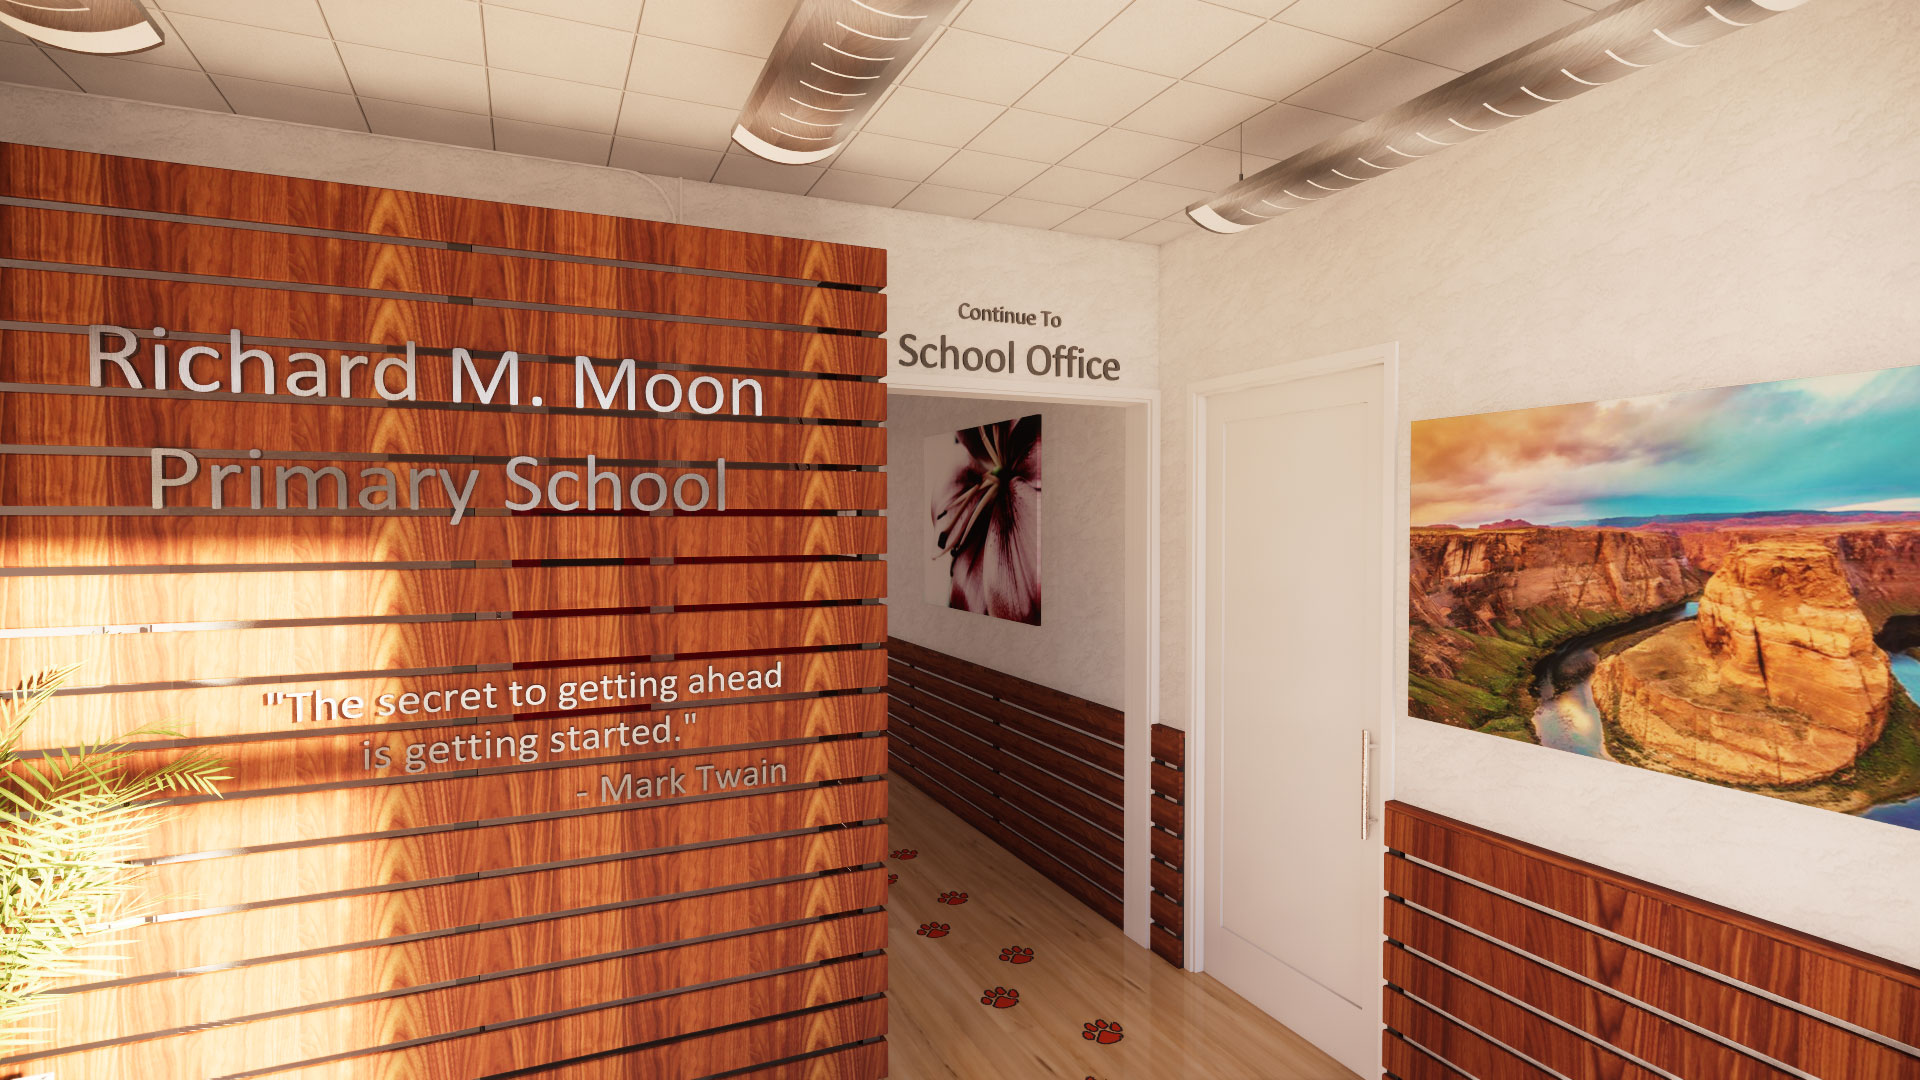 School administrative foyer, with paneled wooden facade, area for pamphlets, and the school name in lettering.